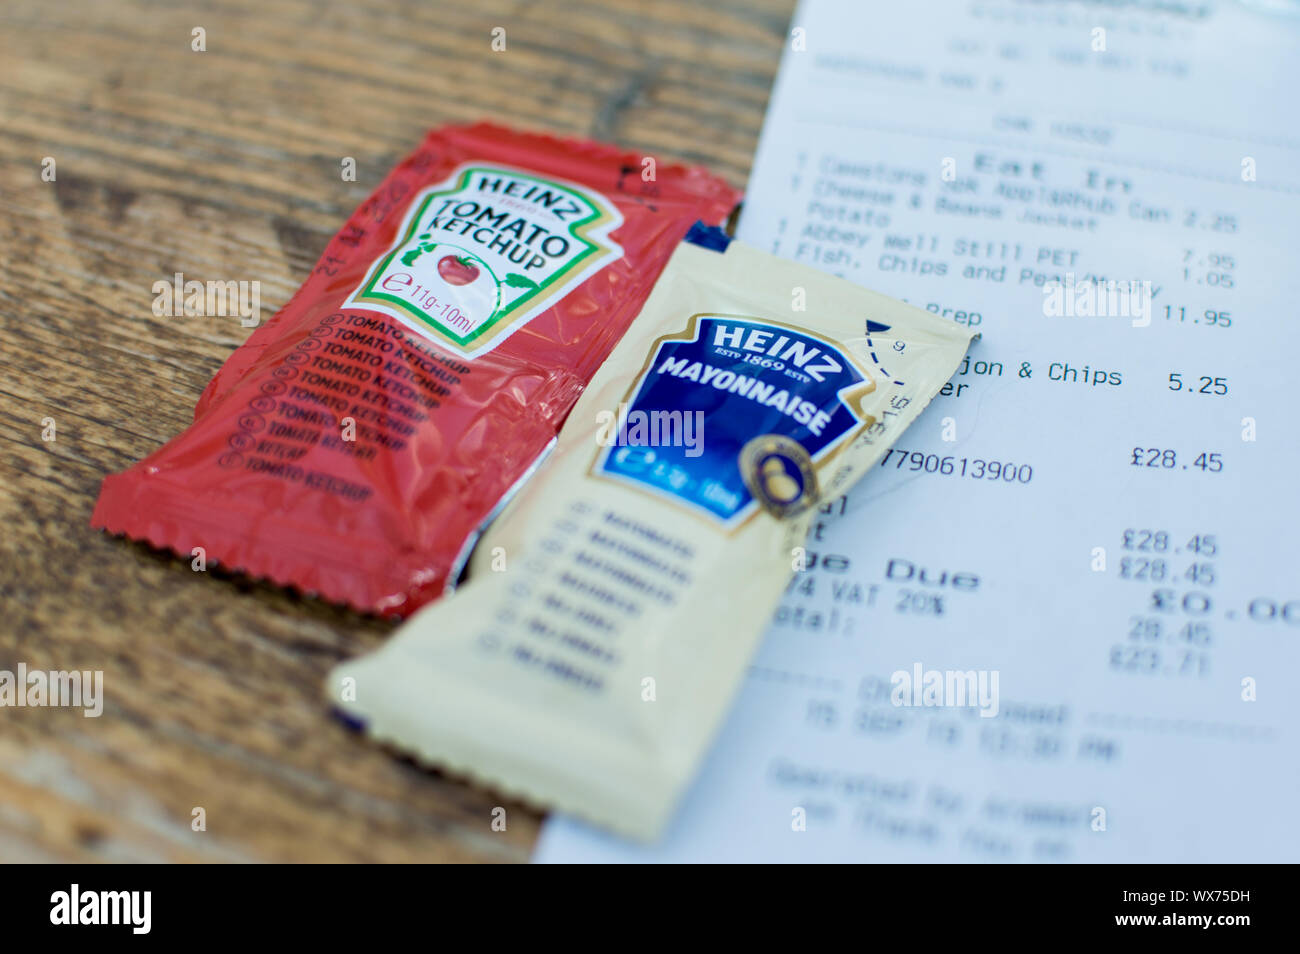 Heinz ketchup and HP Brown sauce on a wooden table next to a restaurant bill Stock Photo